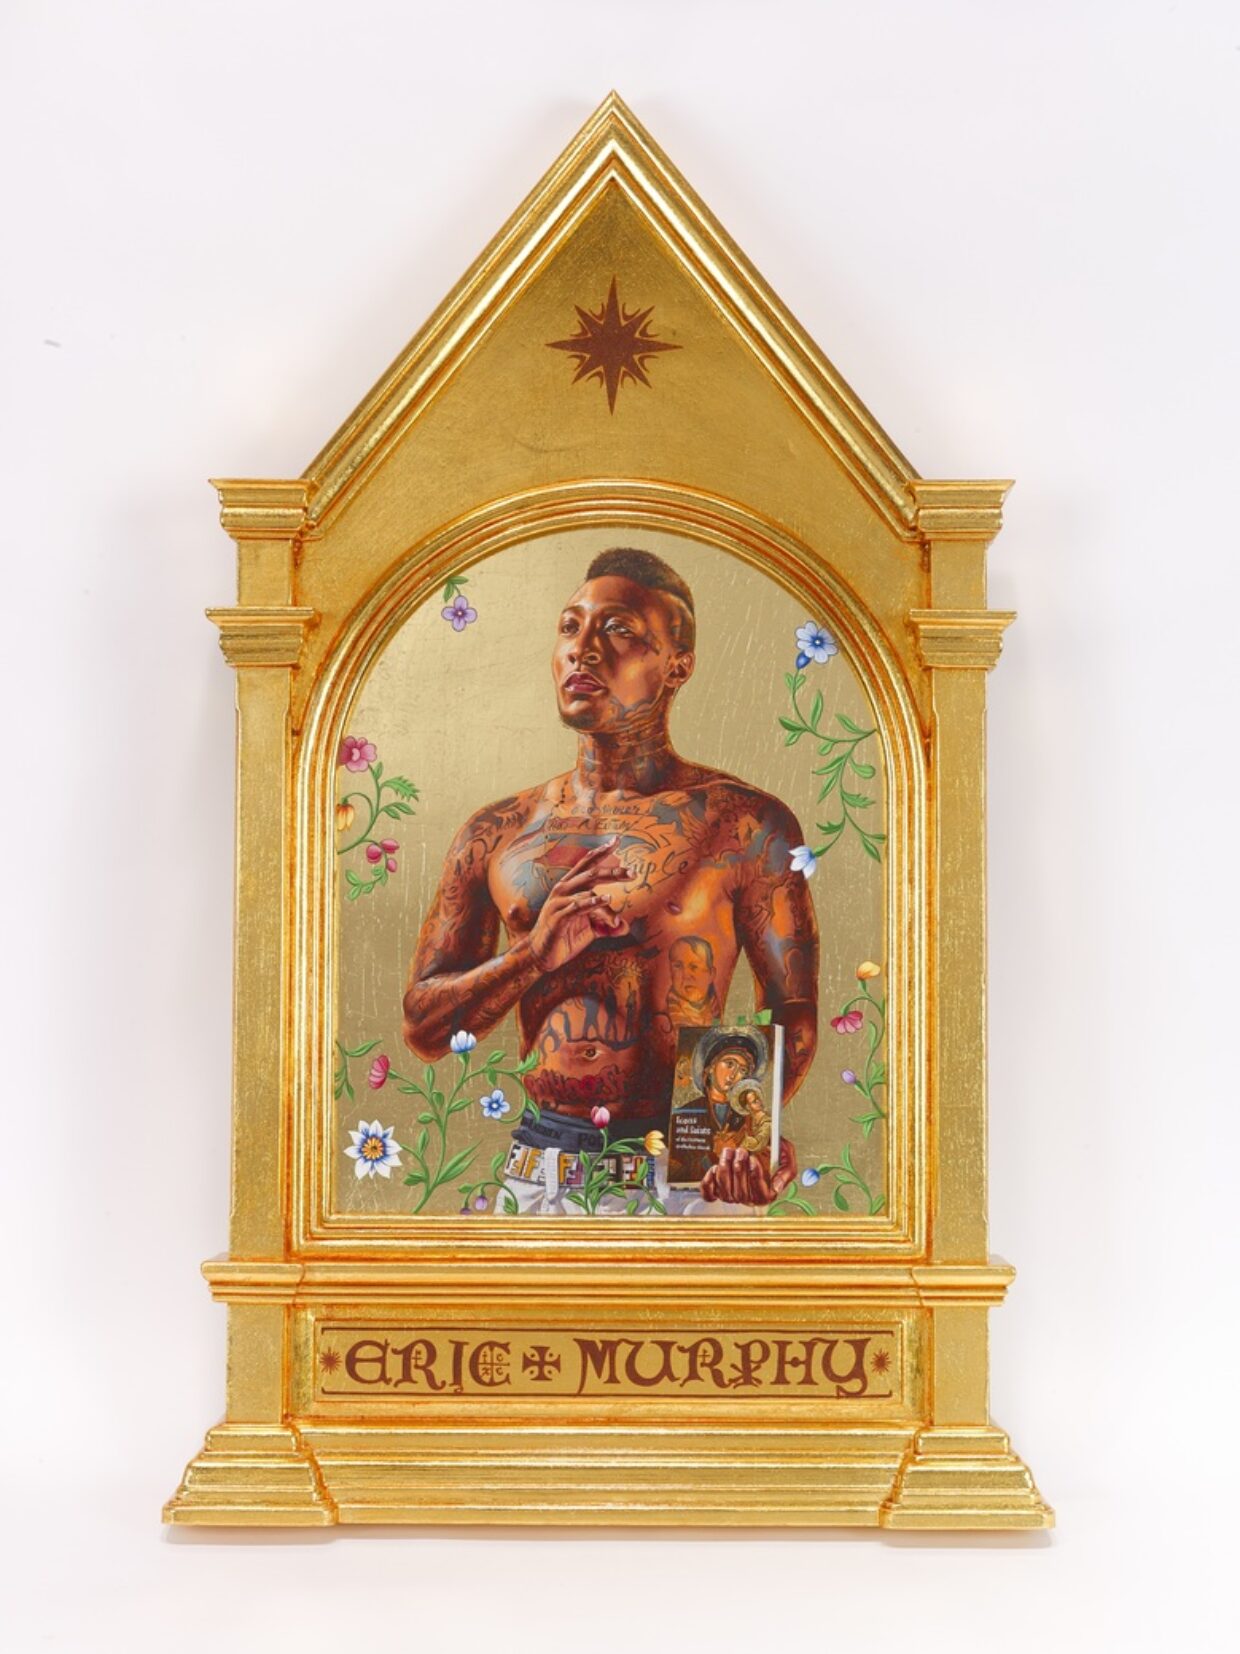 A New Republic: Kehinde Wiley’s Work at Seattle Art Museum | 4